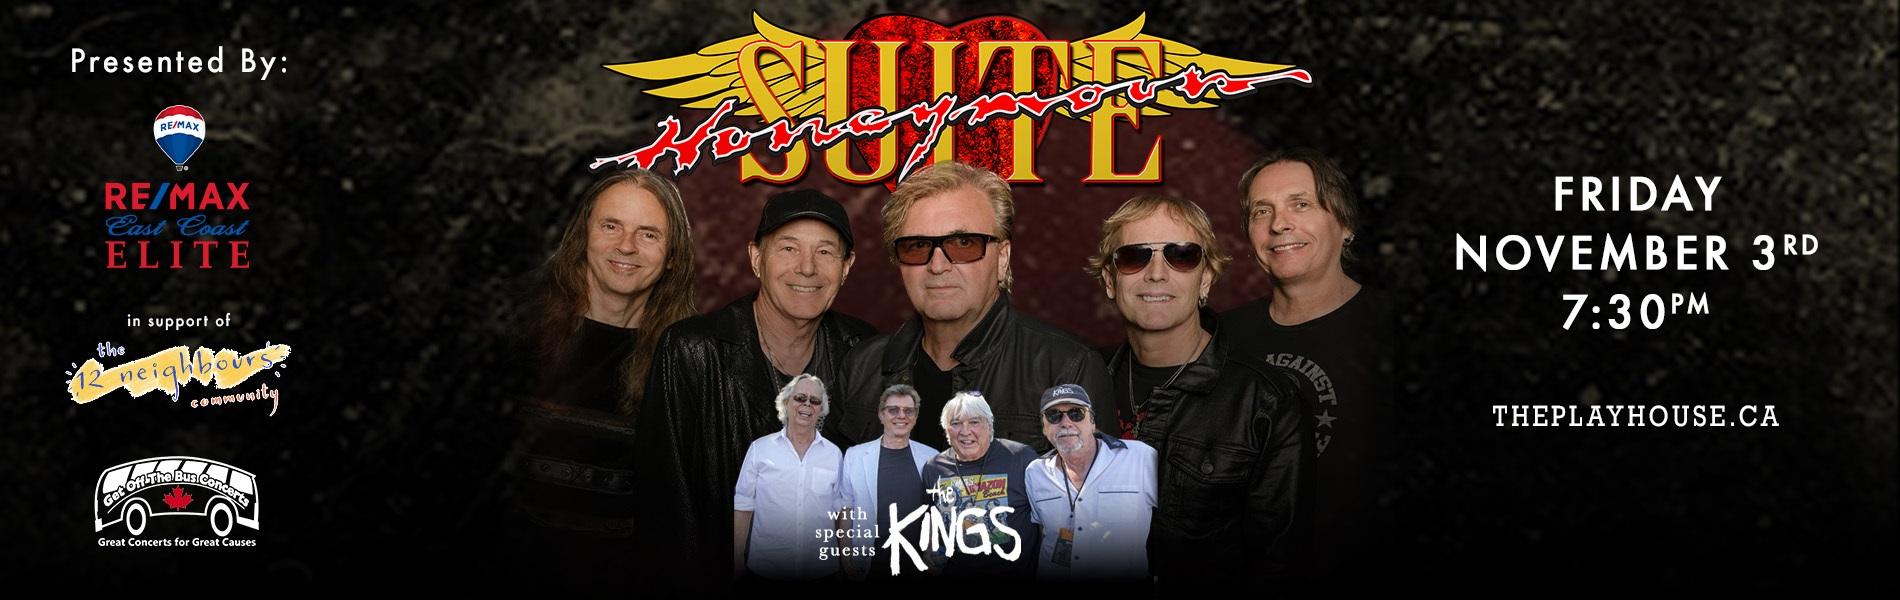 Honeymoon Suite and the Kings with logos